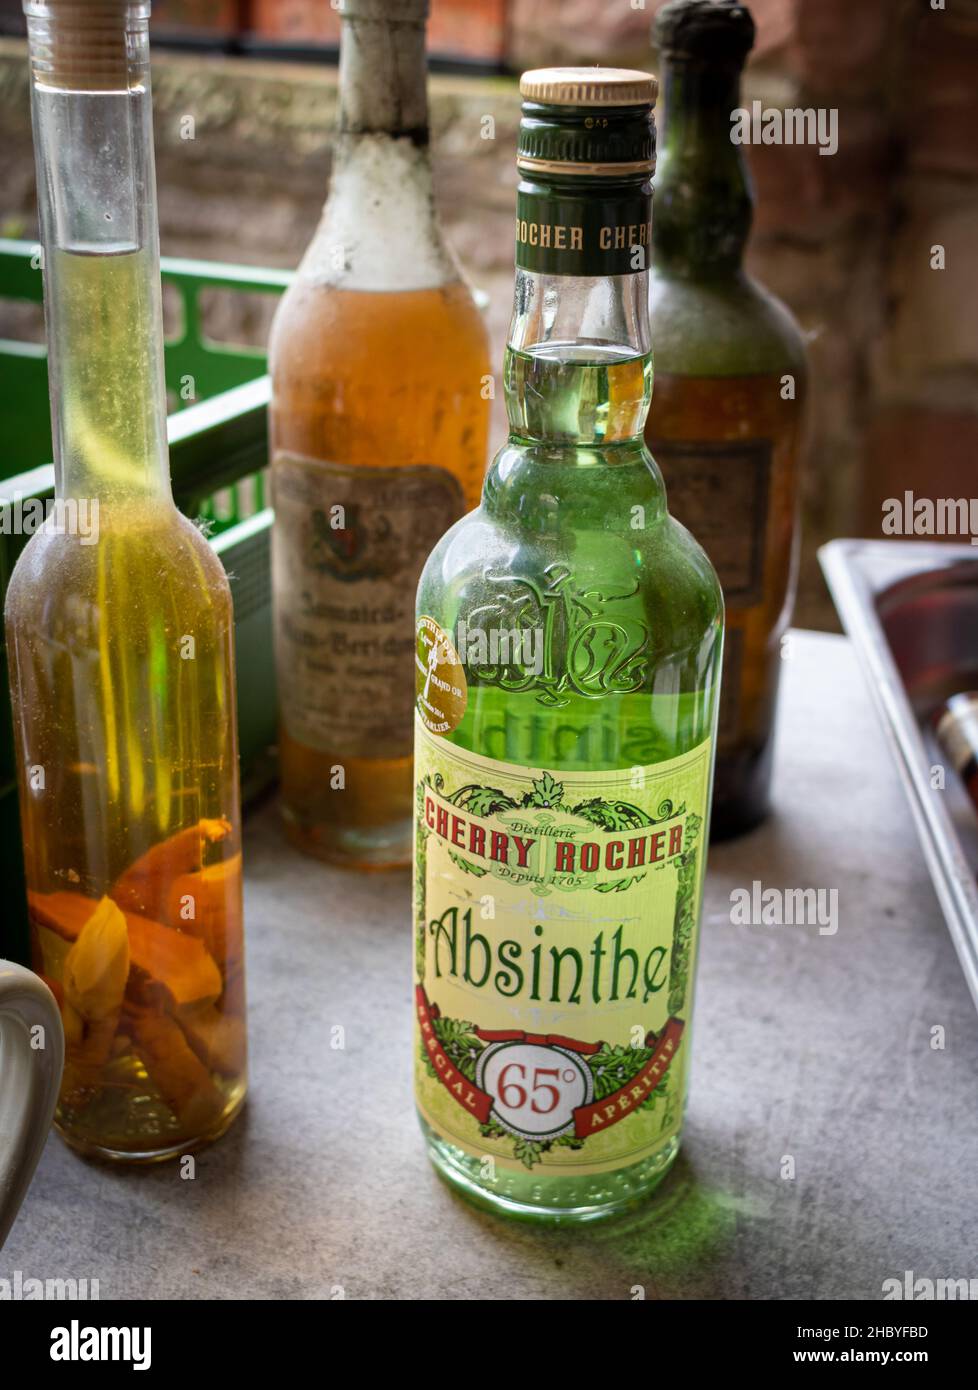 Neckargemuend, Germany - September 11, 2021: A bottle of absinthe and other old liquor bottles at a flea market sale Stock Photo